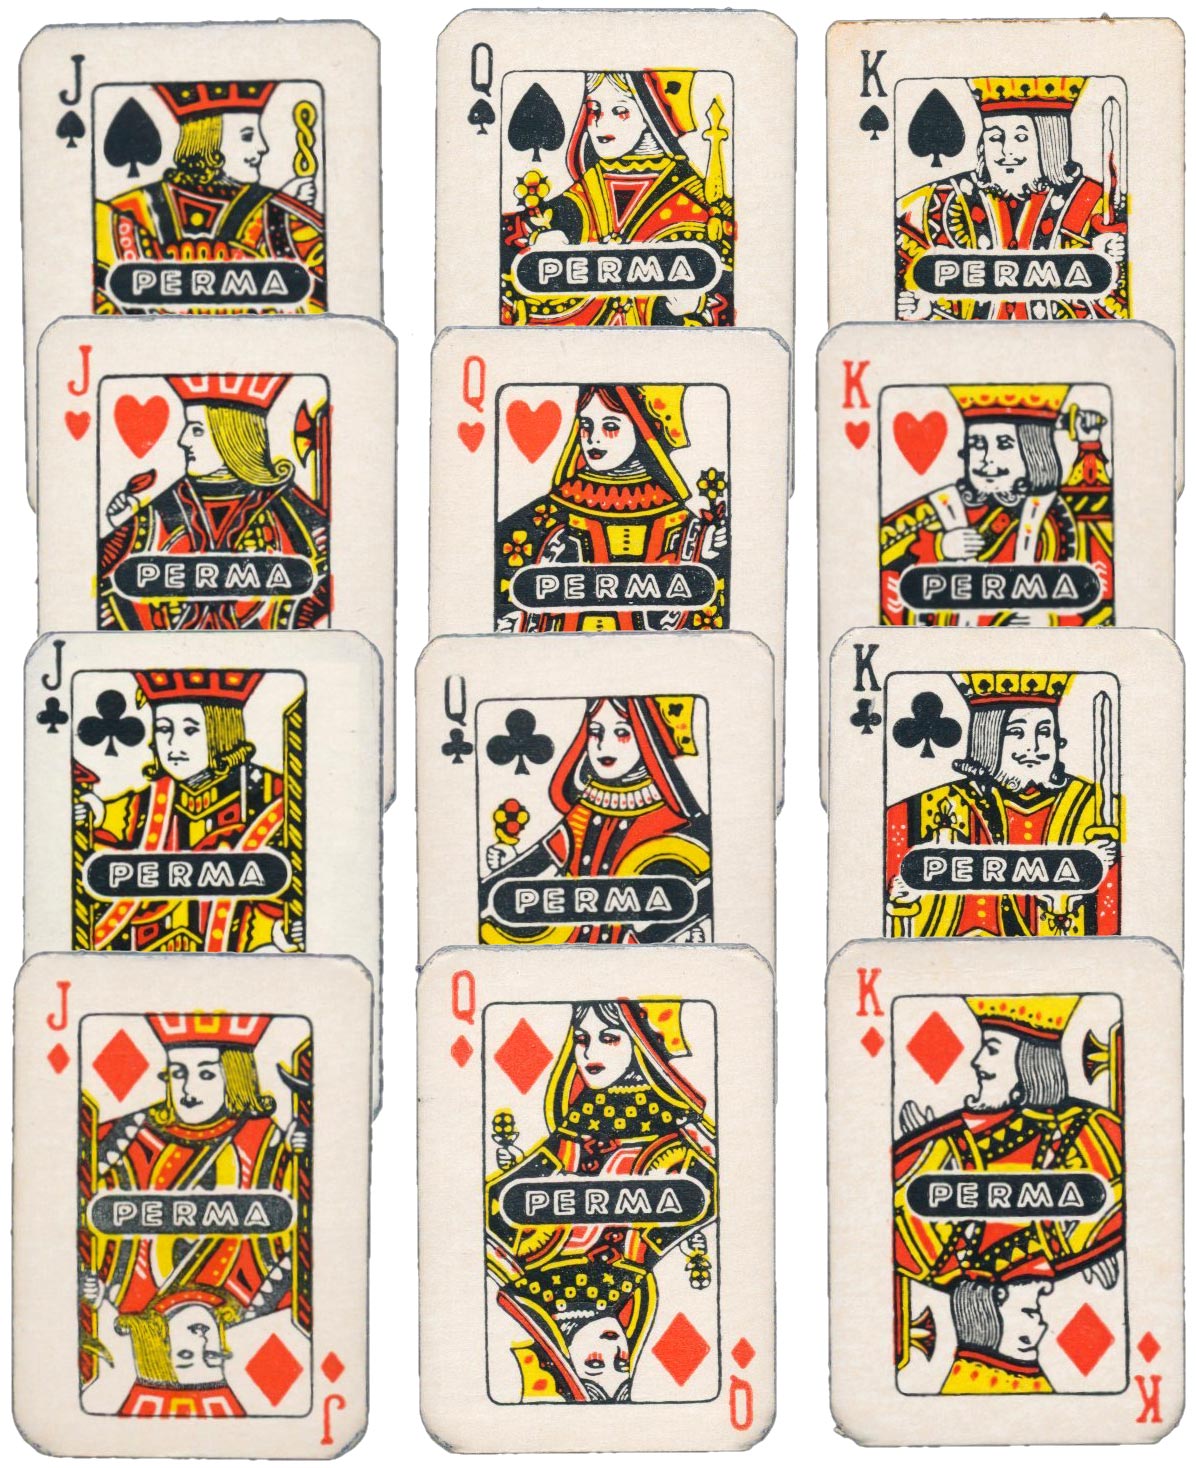 Miniature playing cards advertising “Perma” smoking-related products published by Permalon Ltd, London, c.1948